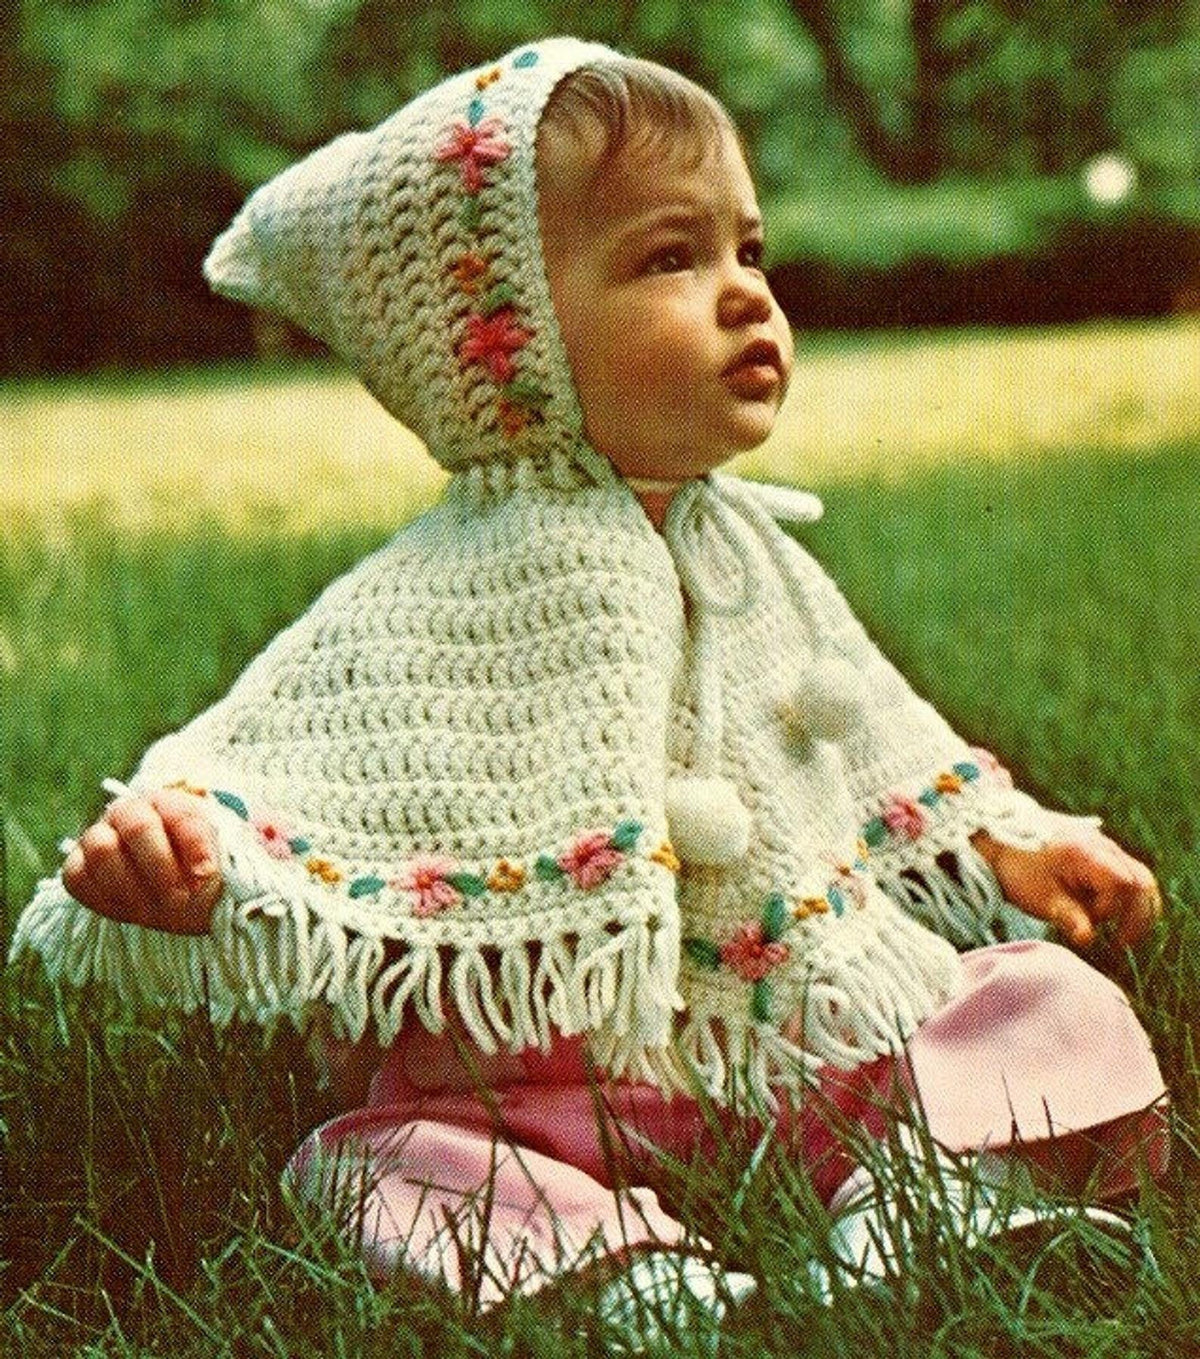 Vintage 1970s Crochet Precious Baby Girl Poncho with Hood Pattern Embroidered Flowers PDF Instant Digital Download Retro Hooded Girls Poncho